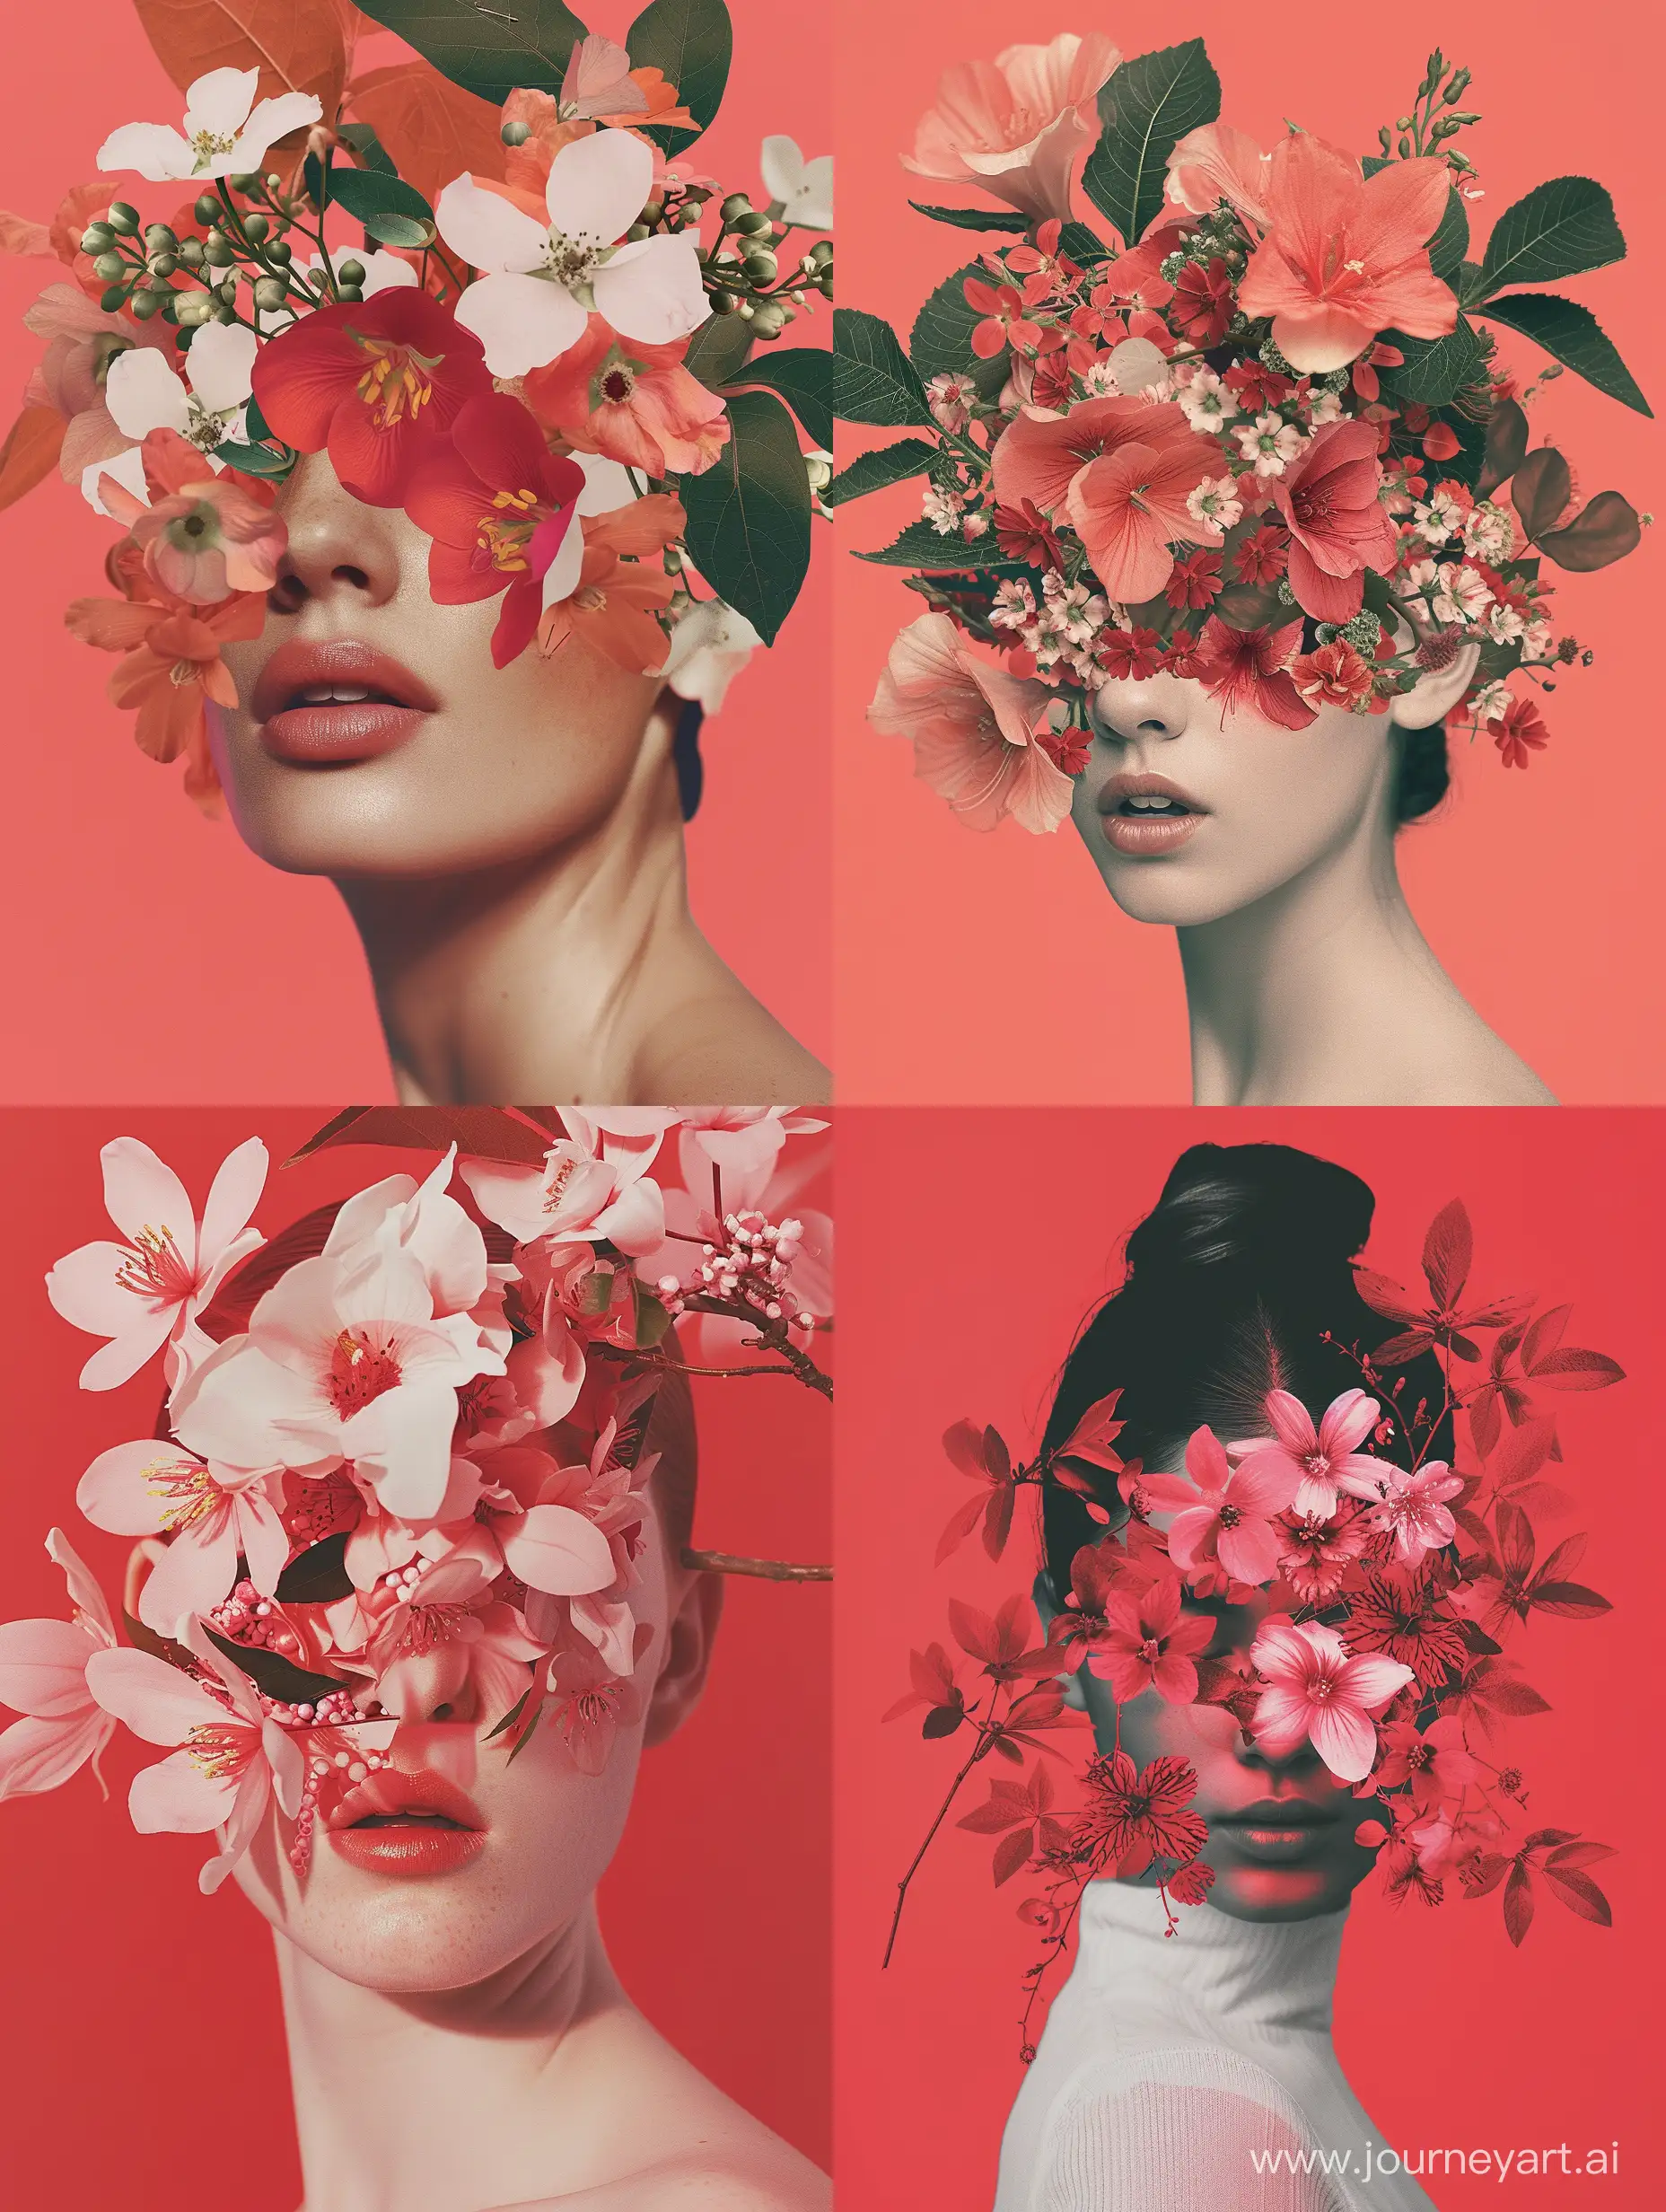 image of woman with flowers covering her face, in the style of collage-like layering, red and pink, serene faces, nature-inspired pieces, photo-realistic techniques, barbiecore, organic geometry